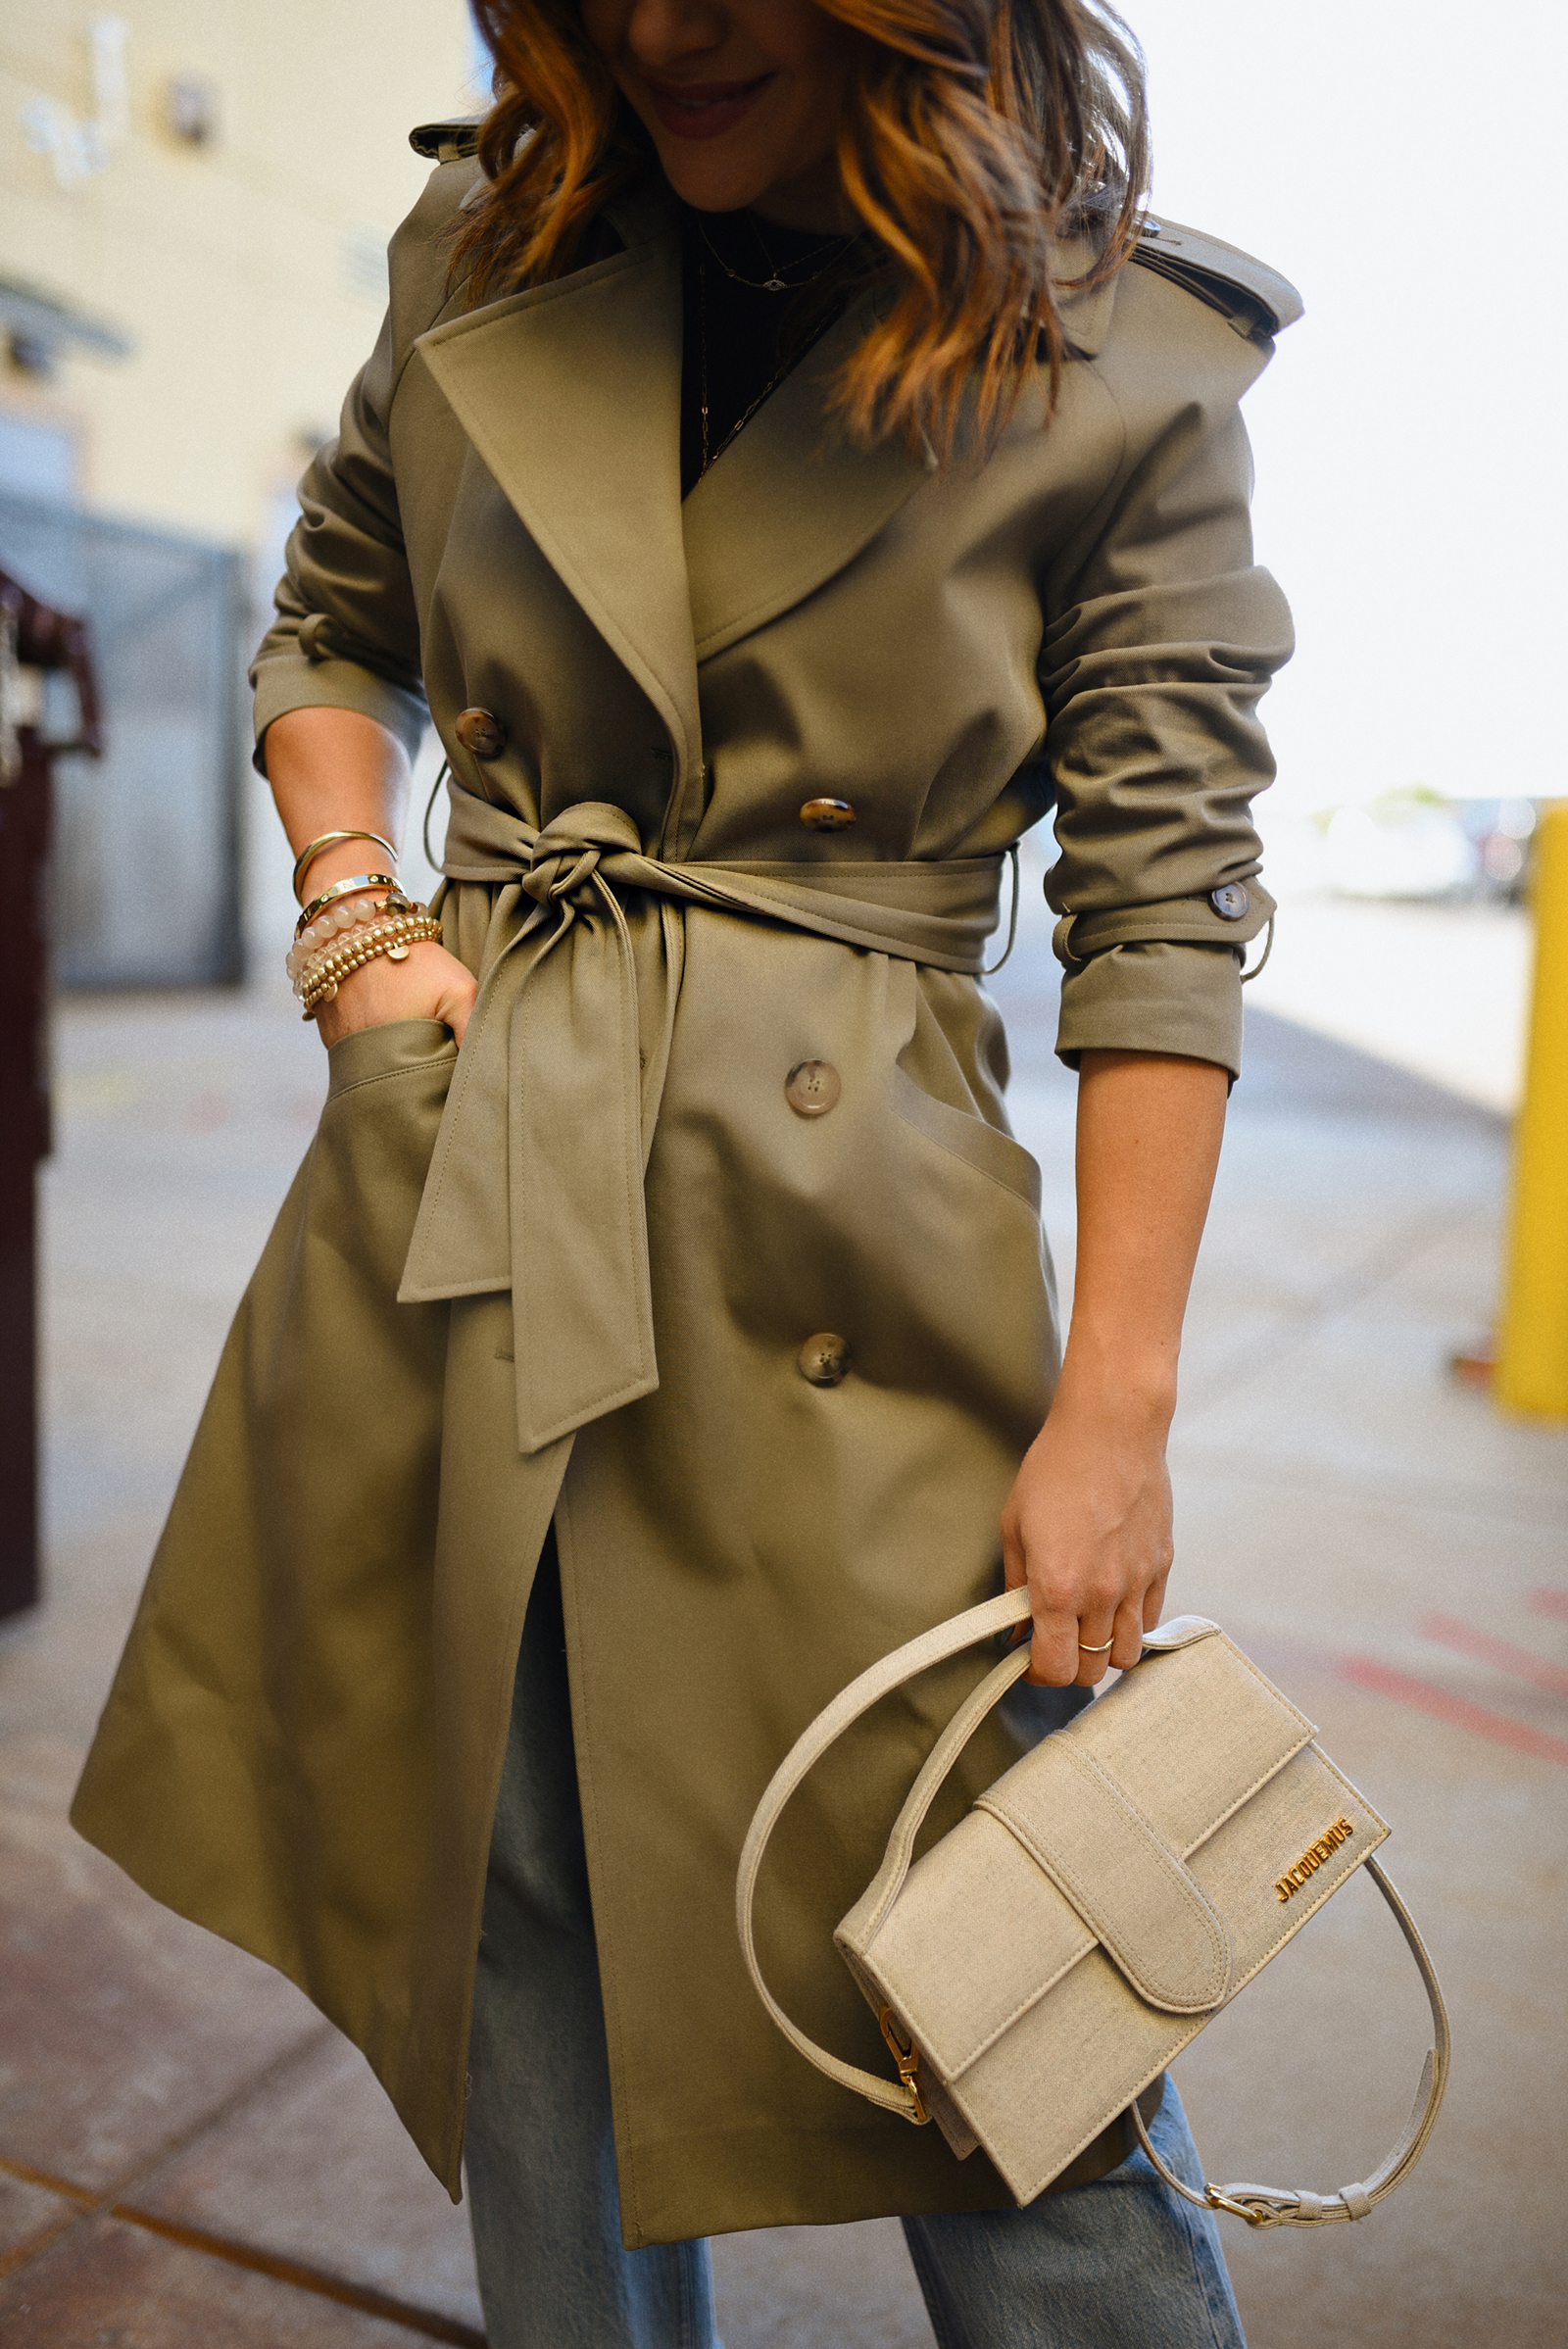 Carolina Hellal Of chic Talk wearing a Sézane trench coat, Abercrombie wide leg jeans, Jacquemus La grand Bambino bag and Lafayette black pointy booties. 